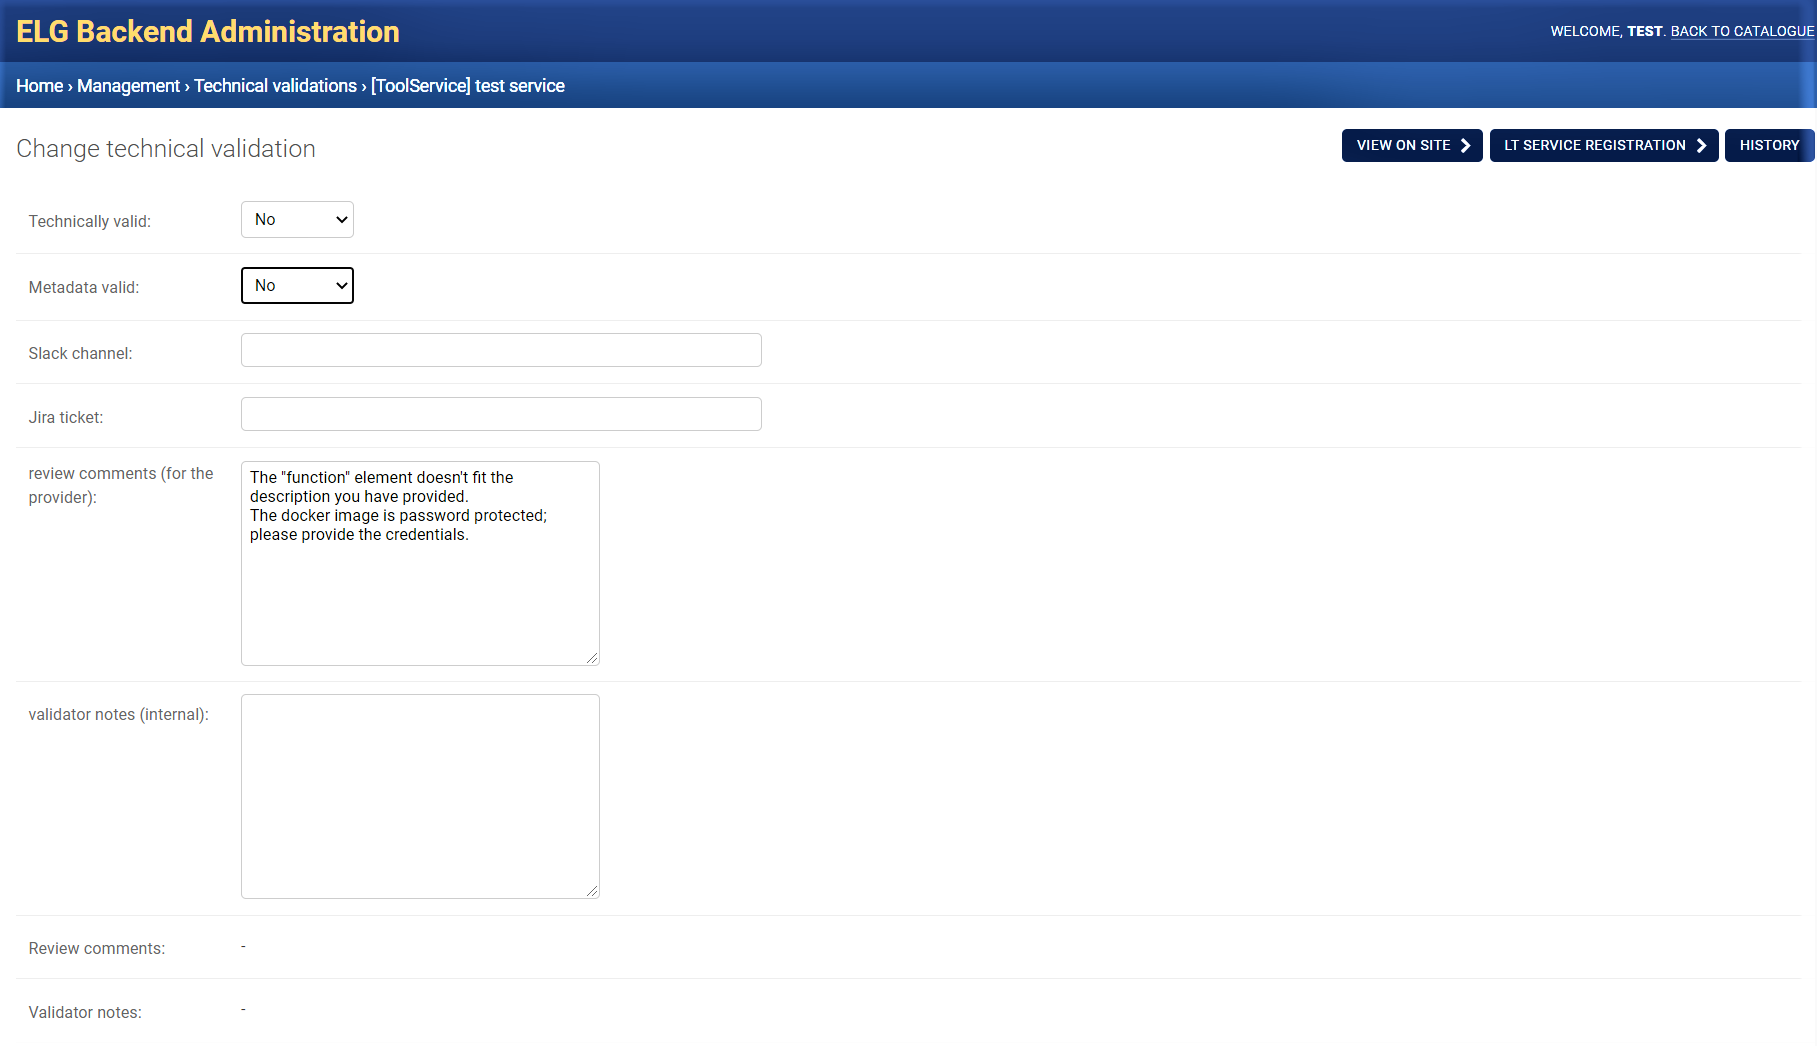 Technical validation form with review comments